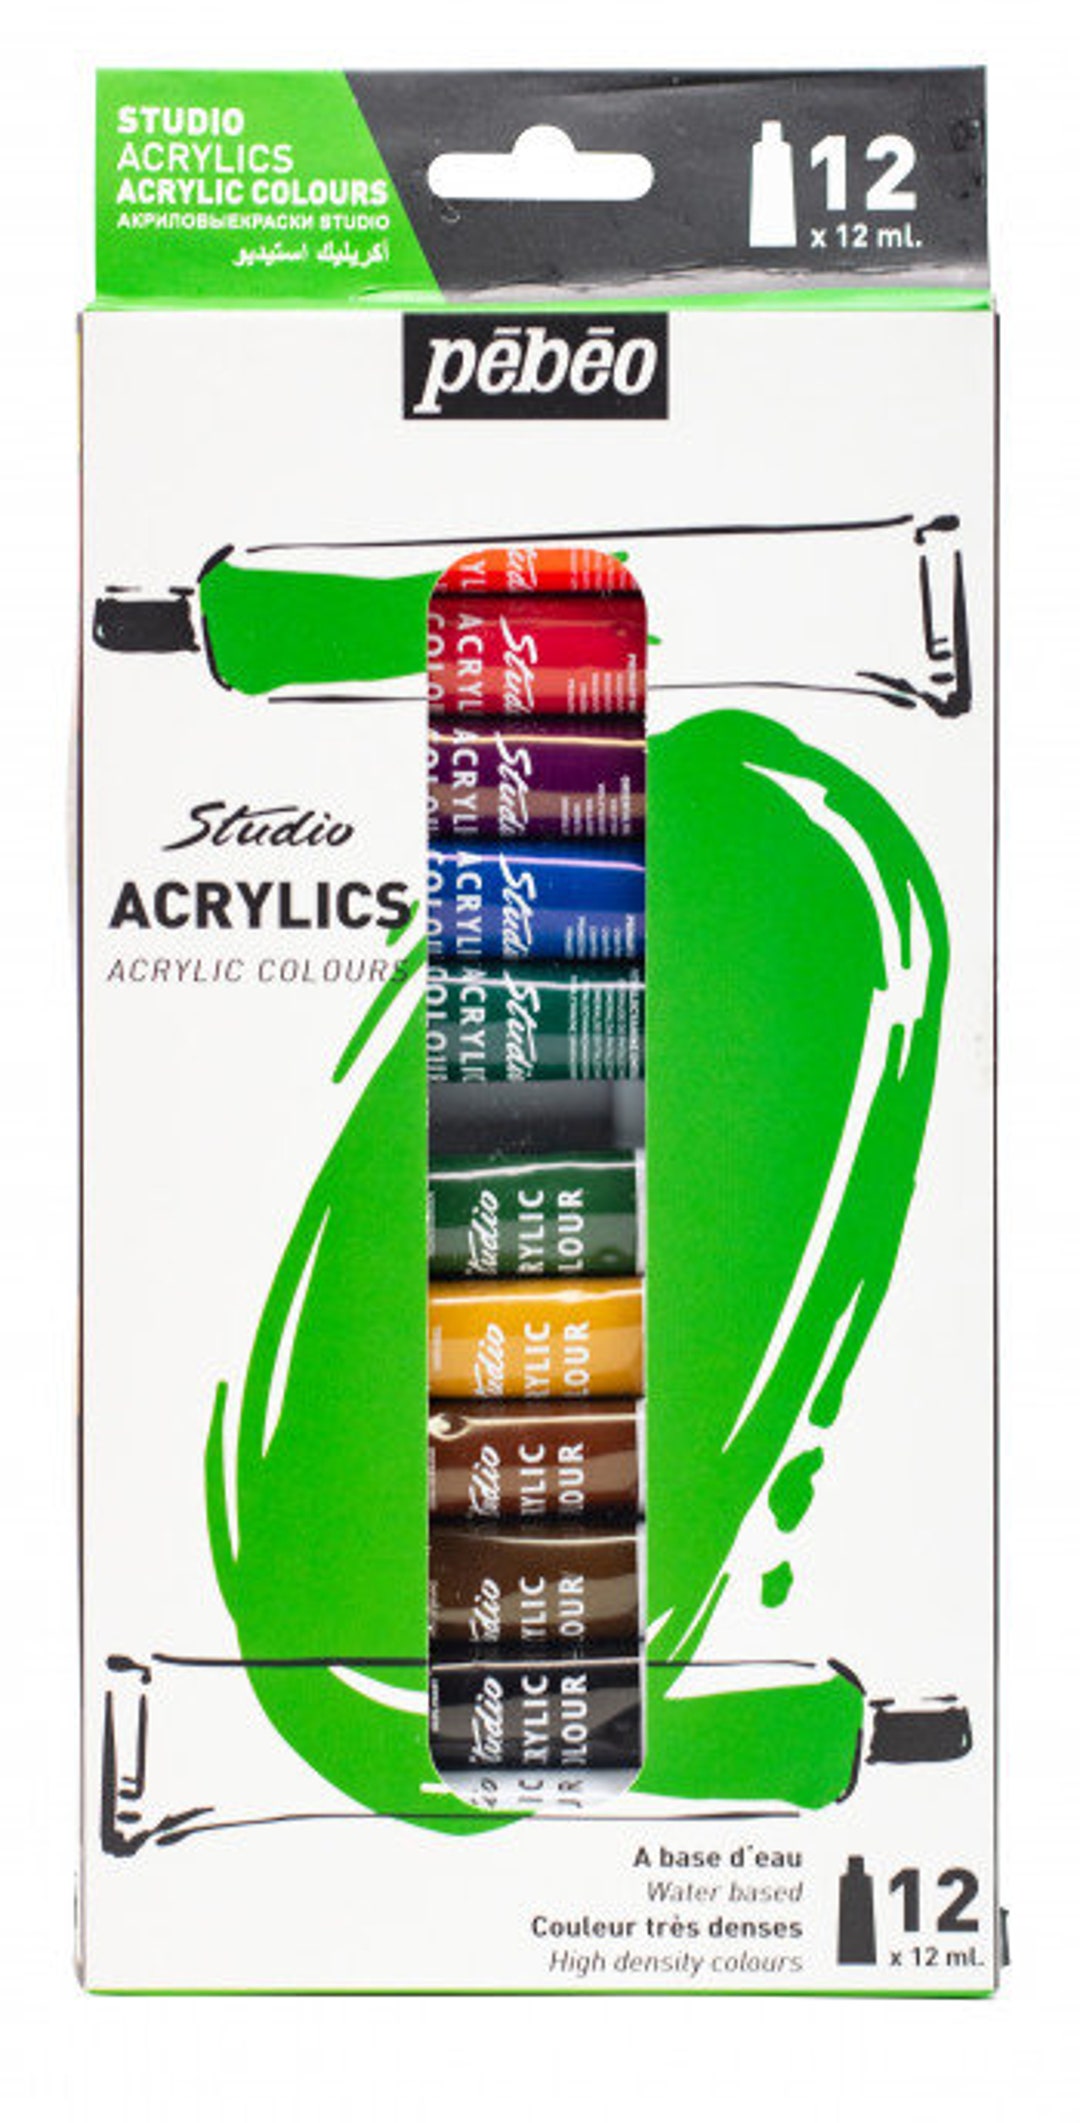 Acrylic Paint Value Set by Craft Smart 36 Assorted Colors 